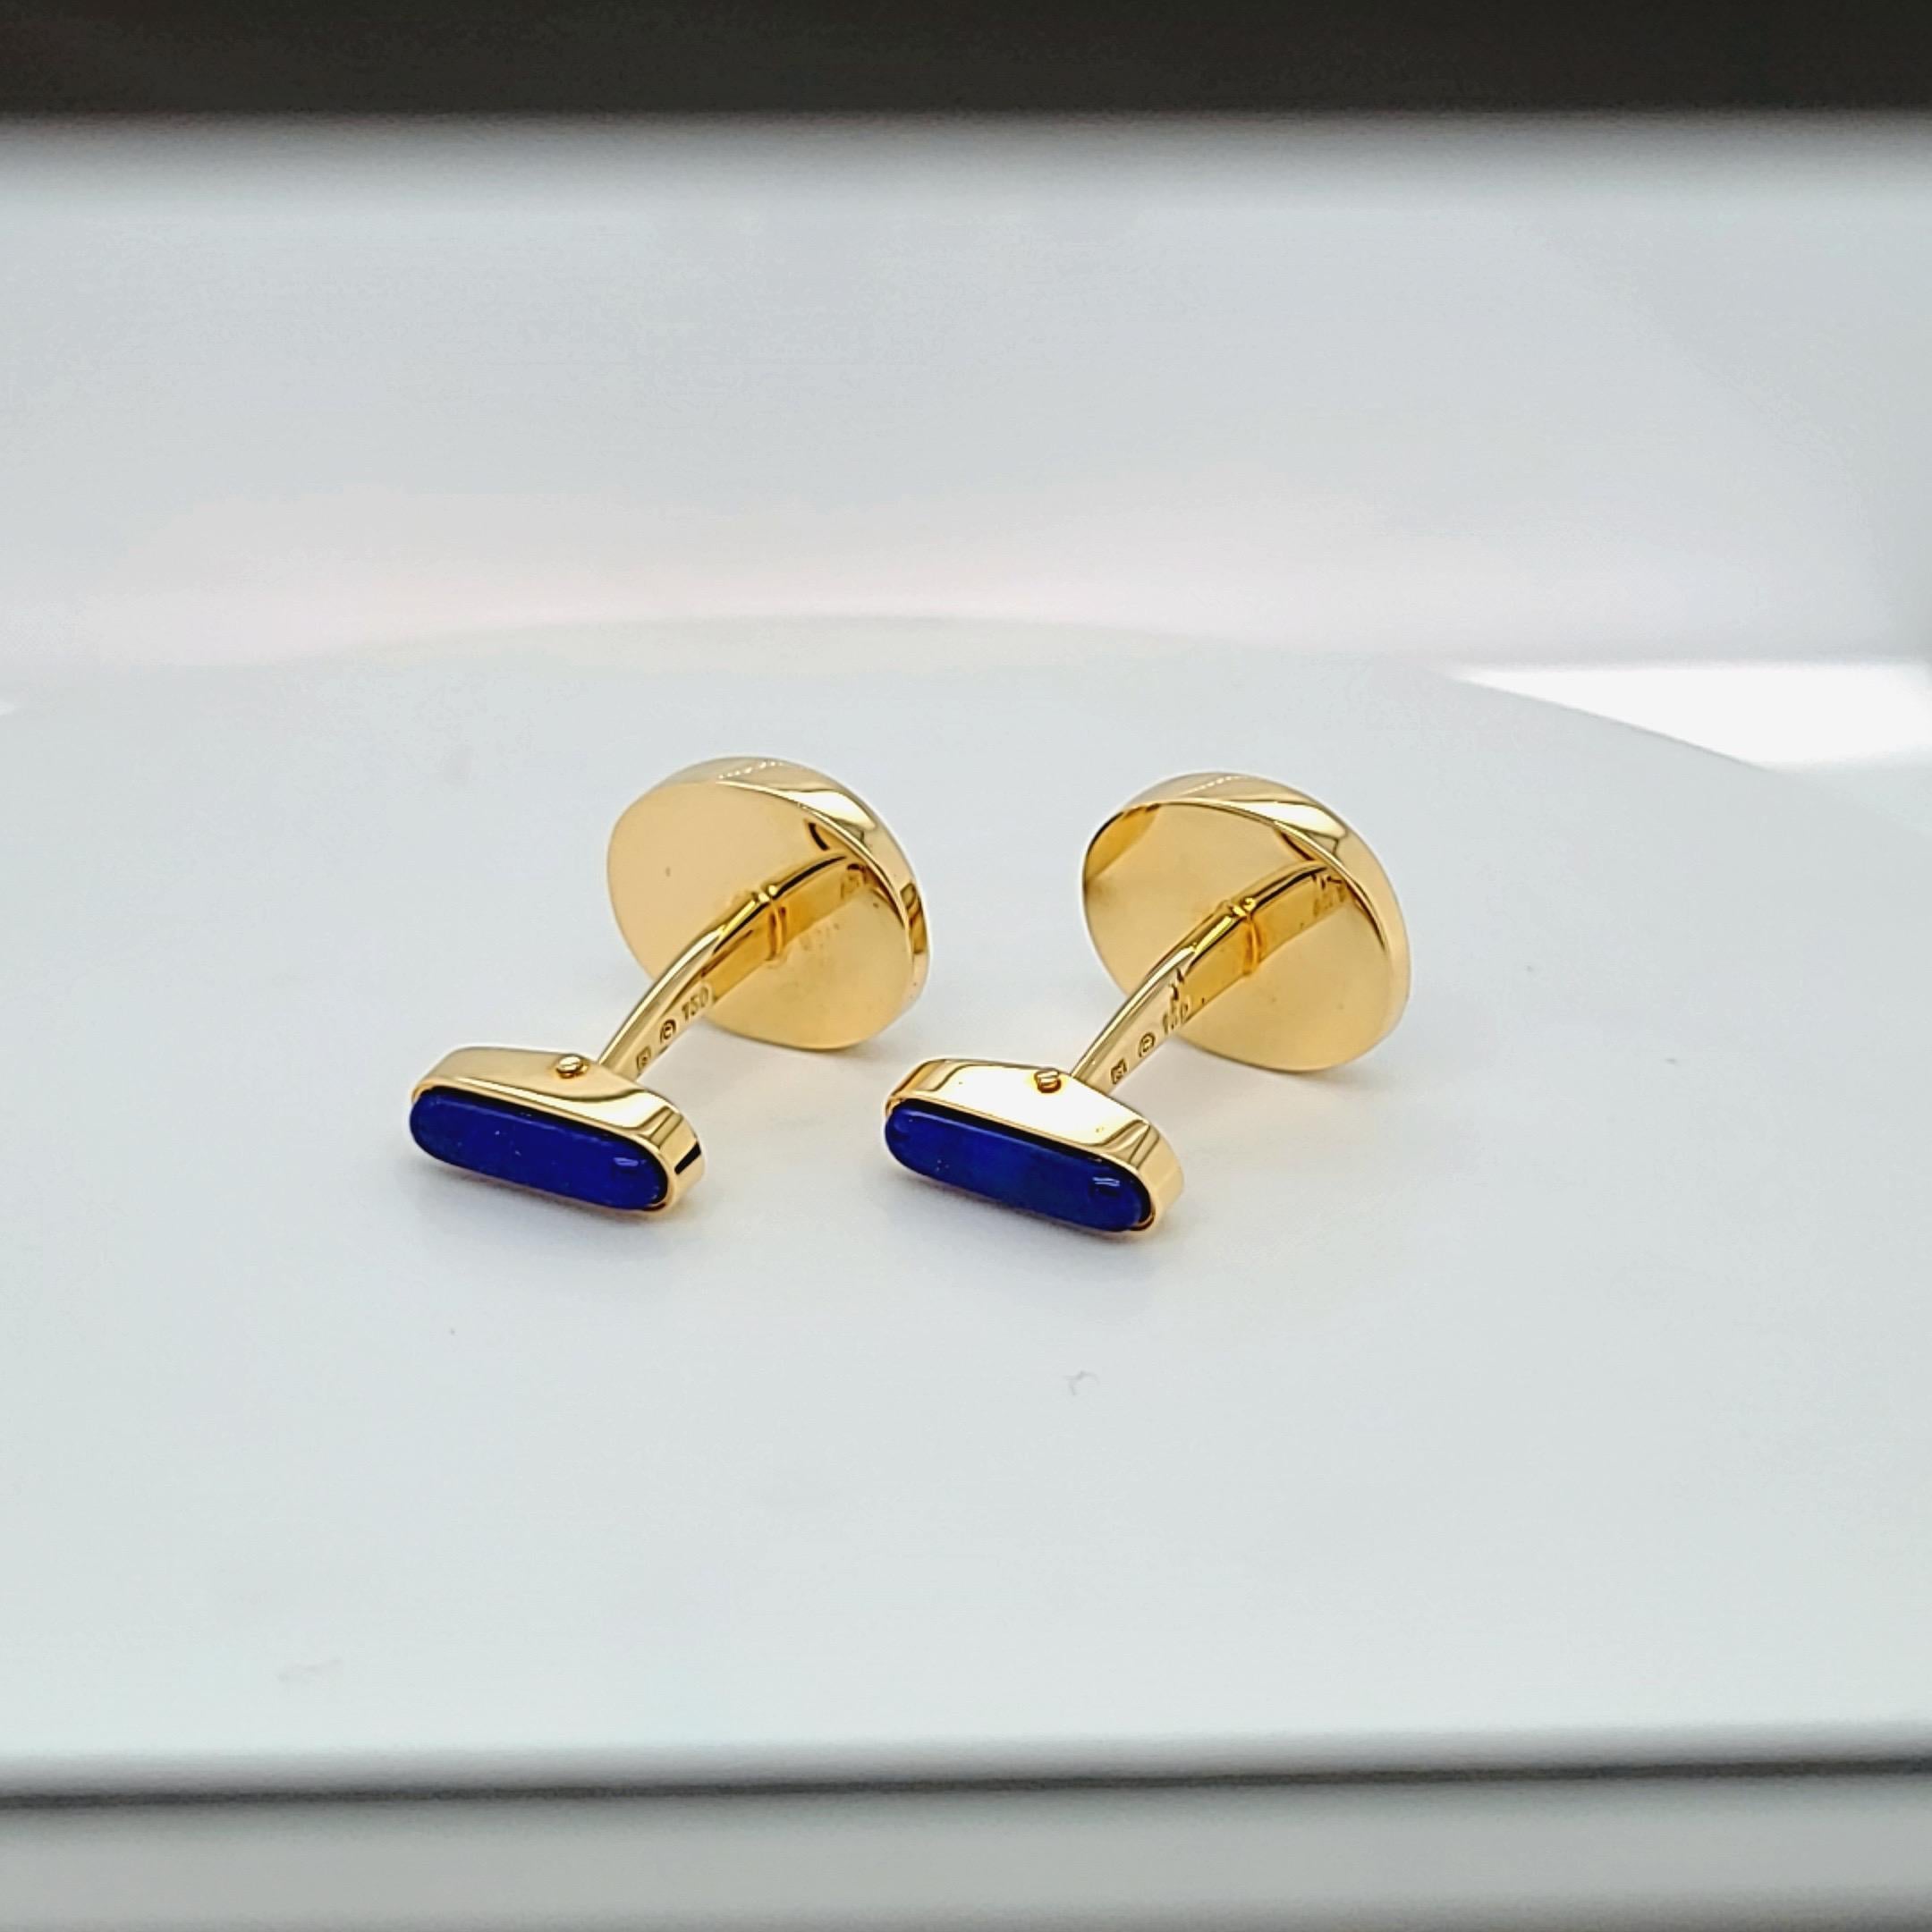 George Gero 18 Karat Yellow Gold Oval Cufflinks with Lapis and Onyx In New Condition For Sale In New York, NY